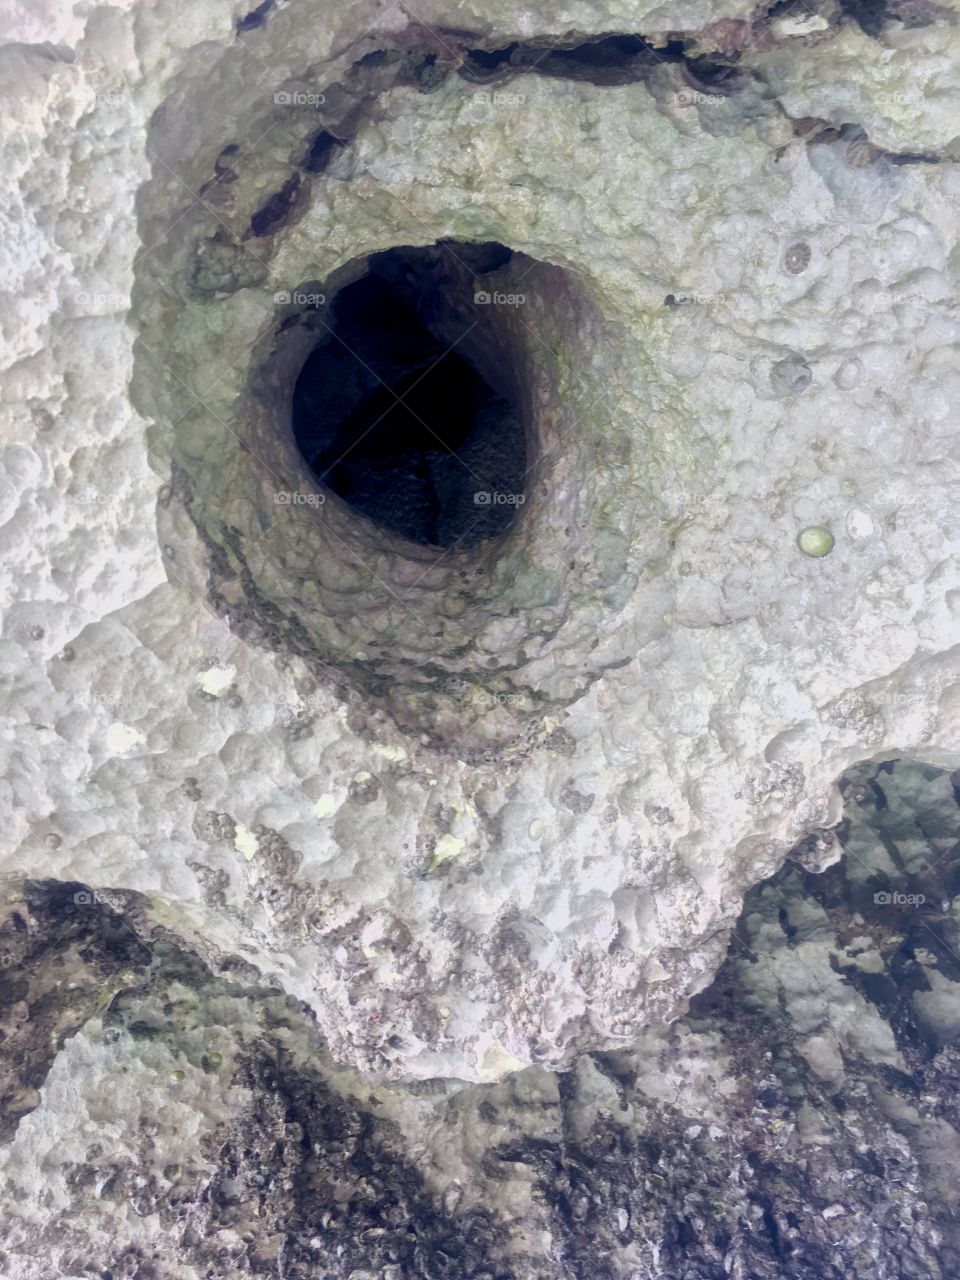 A hole in the rock formations